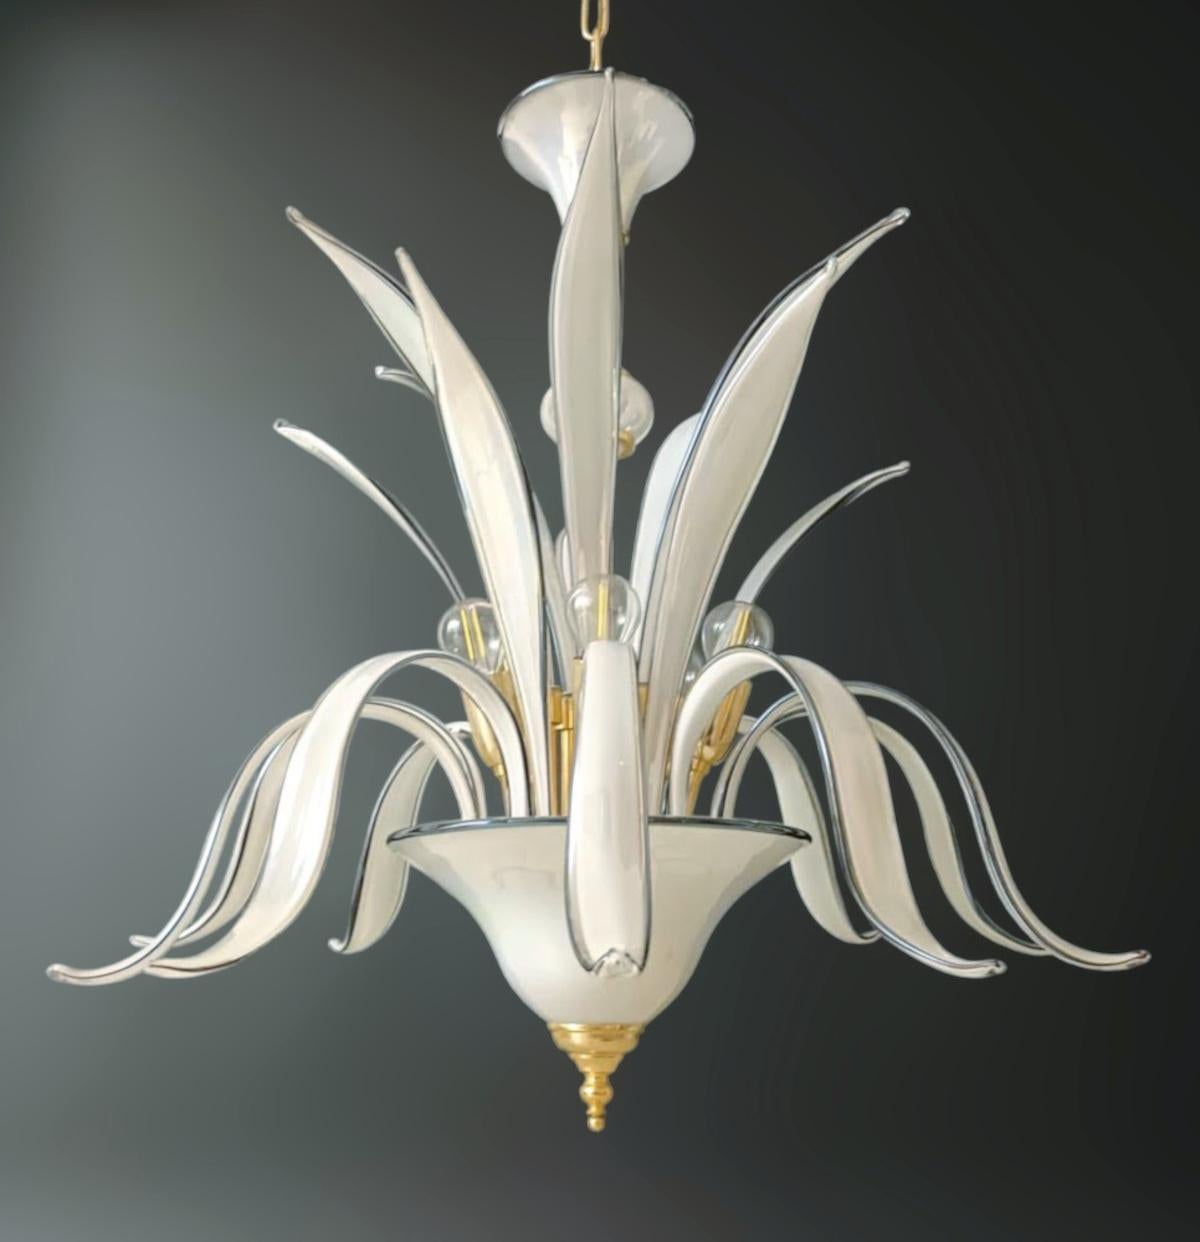 Vintage Italian Venetian chandelier with elegant pearl colored Murano glass leaves with black edge / Made in Italy, circa 1970s
Measures: Diameter 25.5 inches, height 27.5 inches, total height 45 inches including original chain and canopy
5 lights /